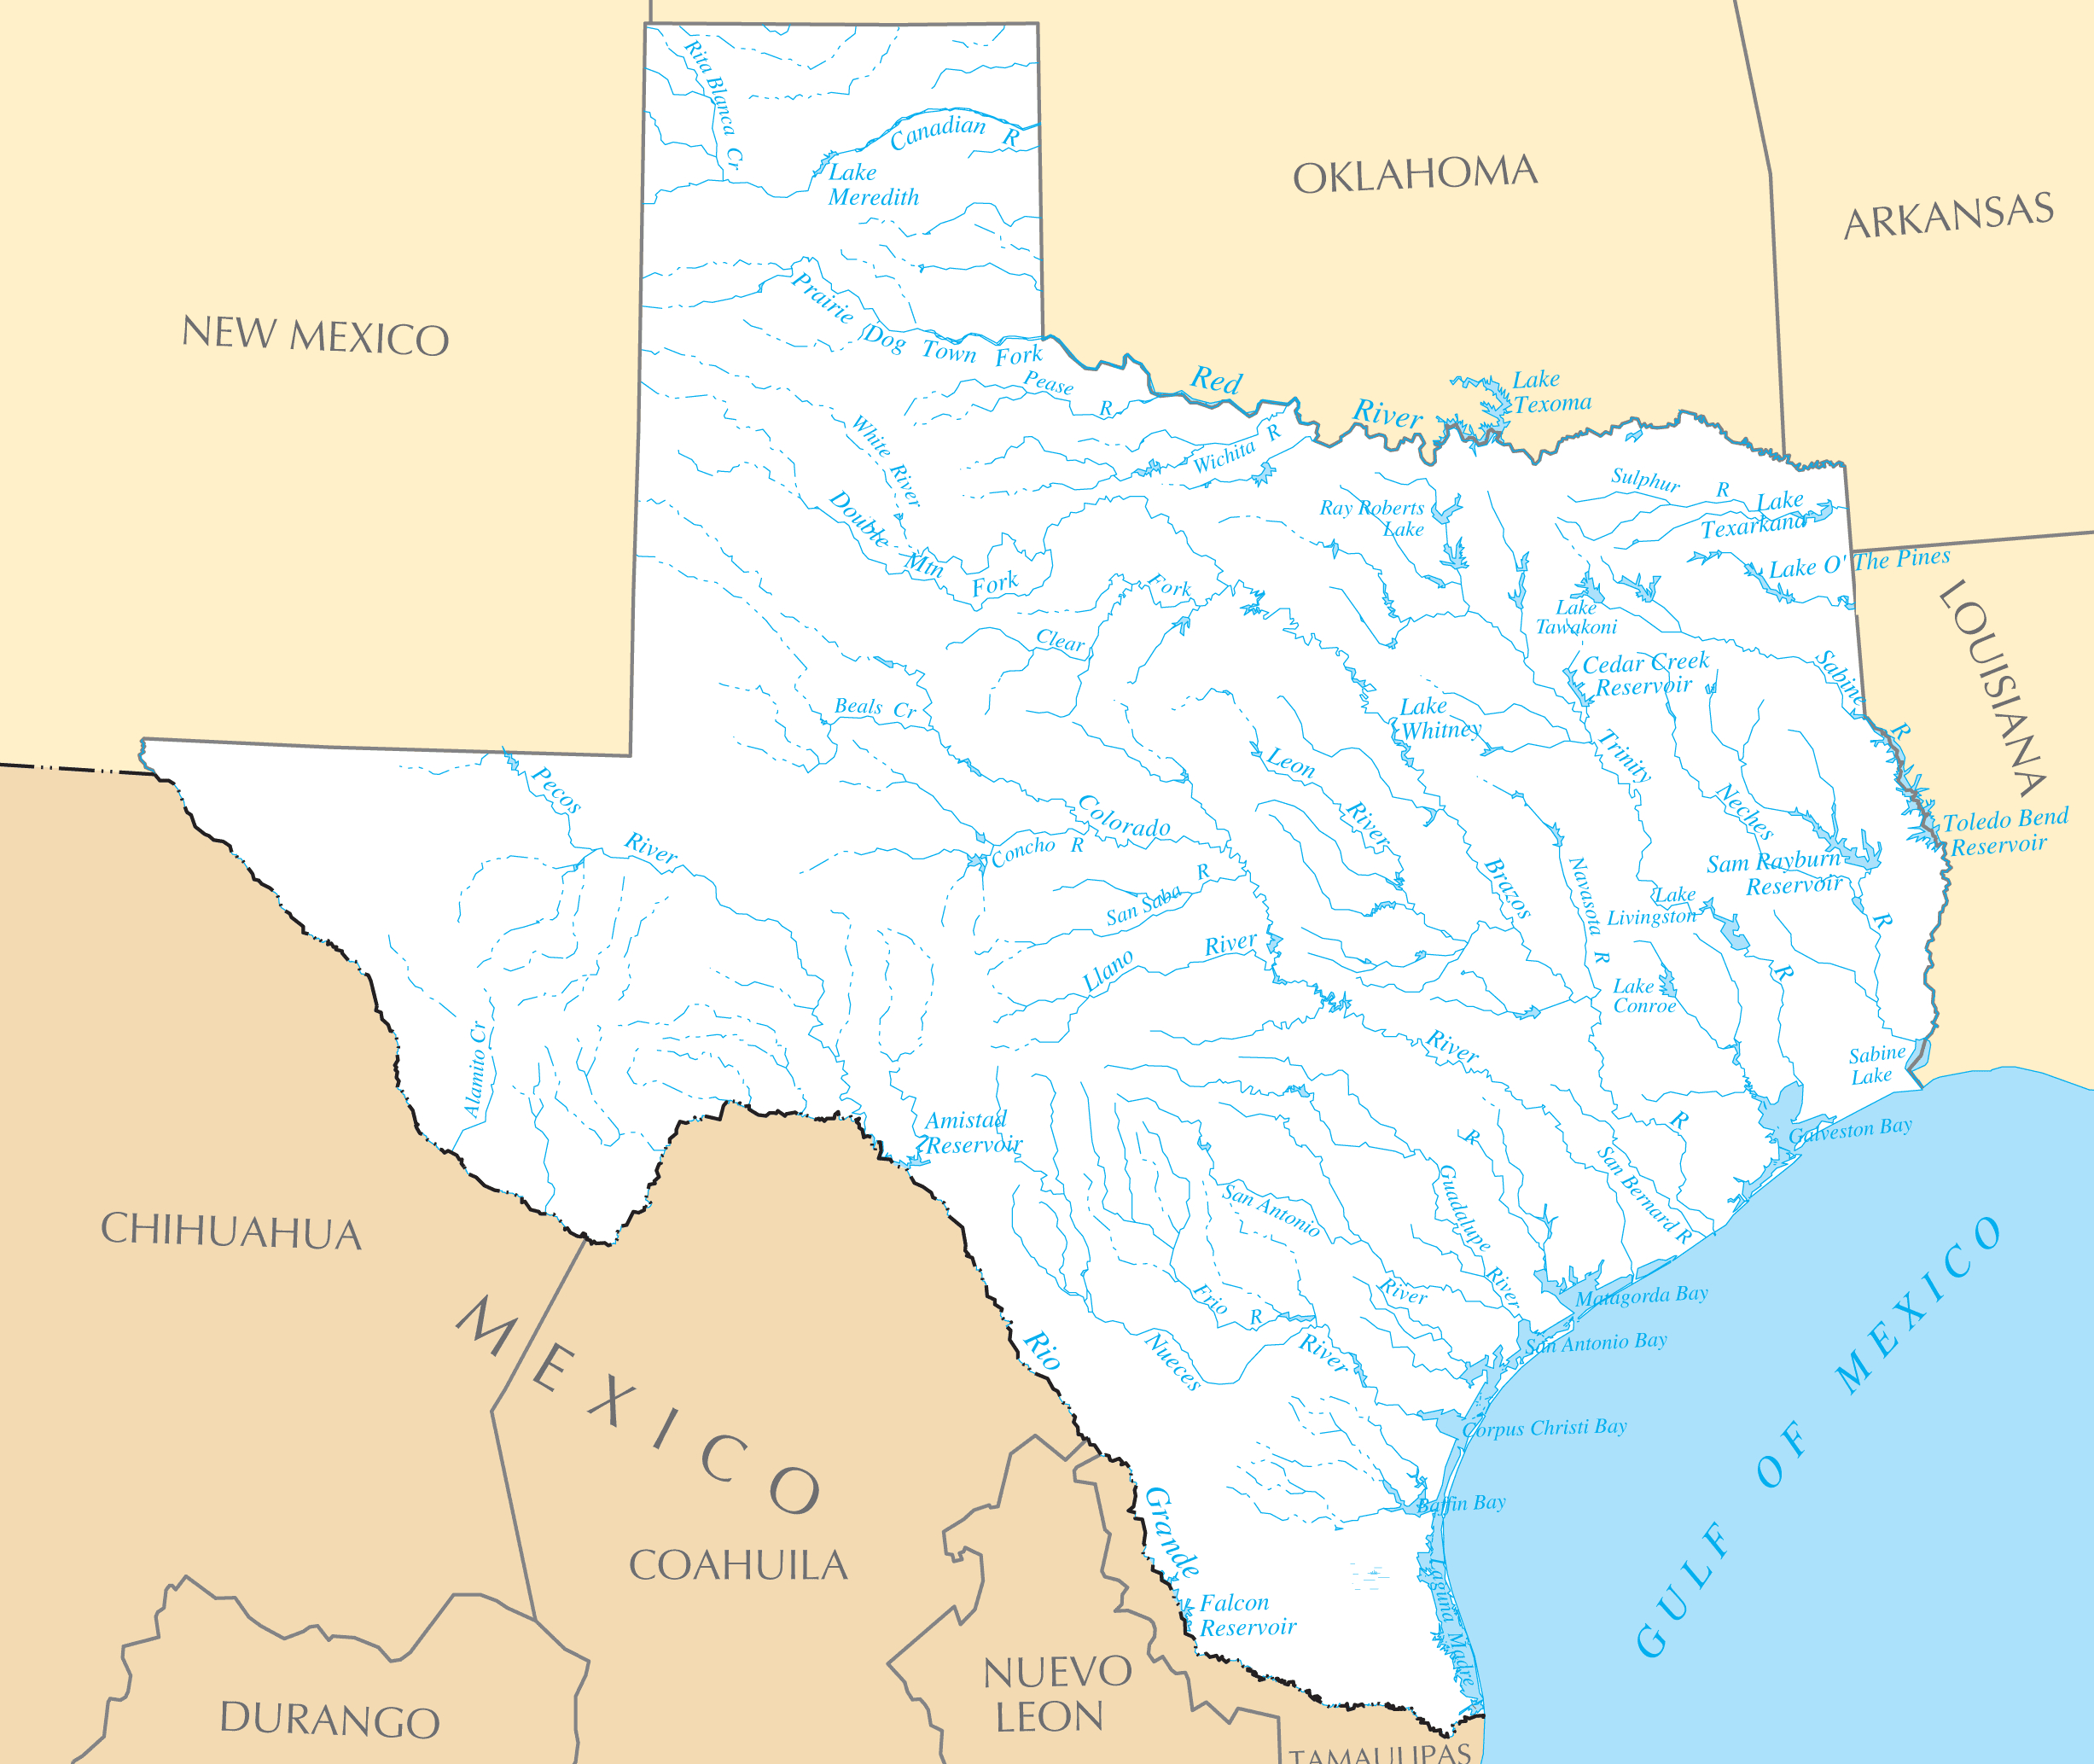 Texas Rivers And Lakes • Mapsof - East Texas Lakes Map